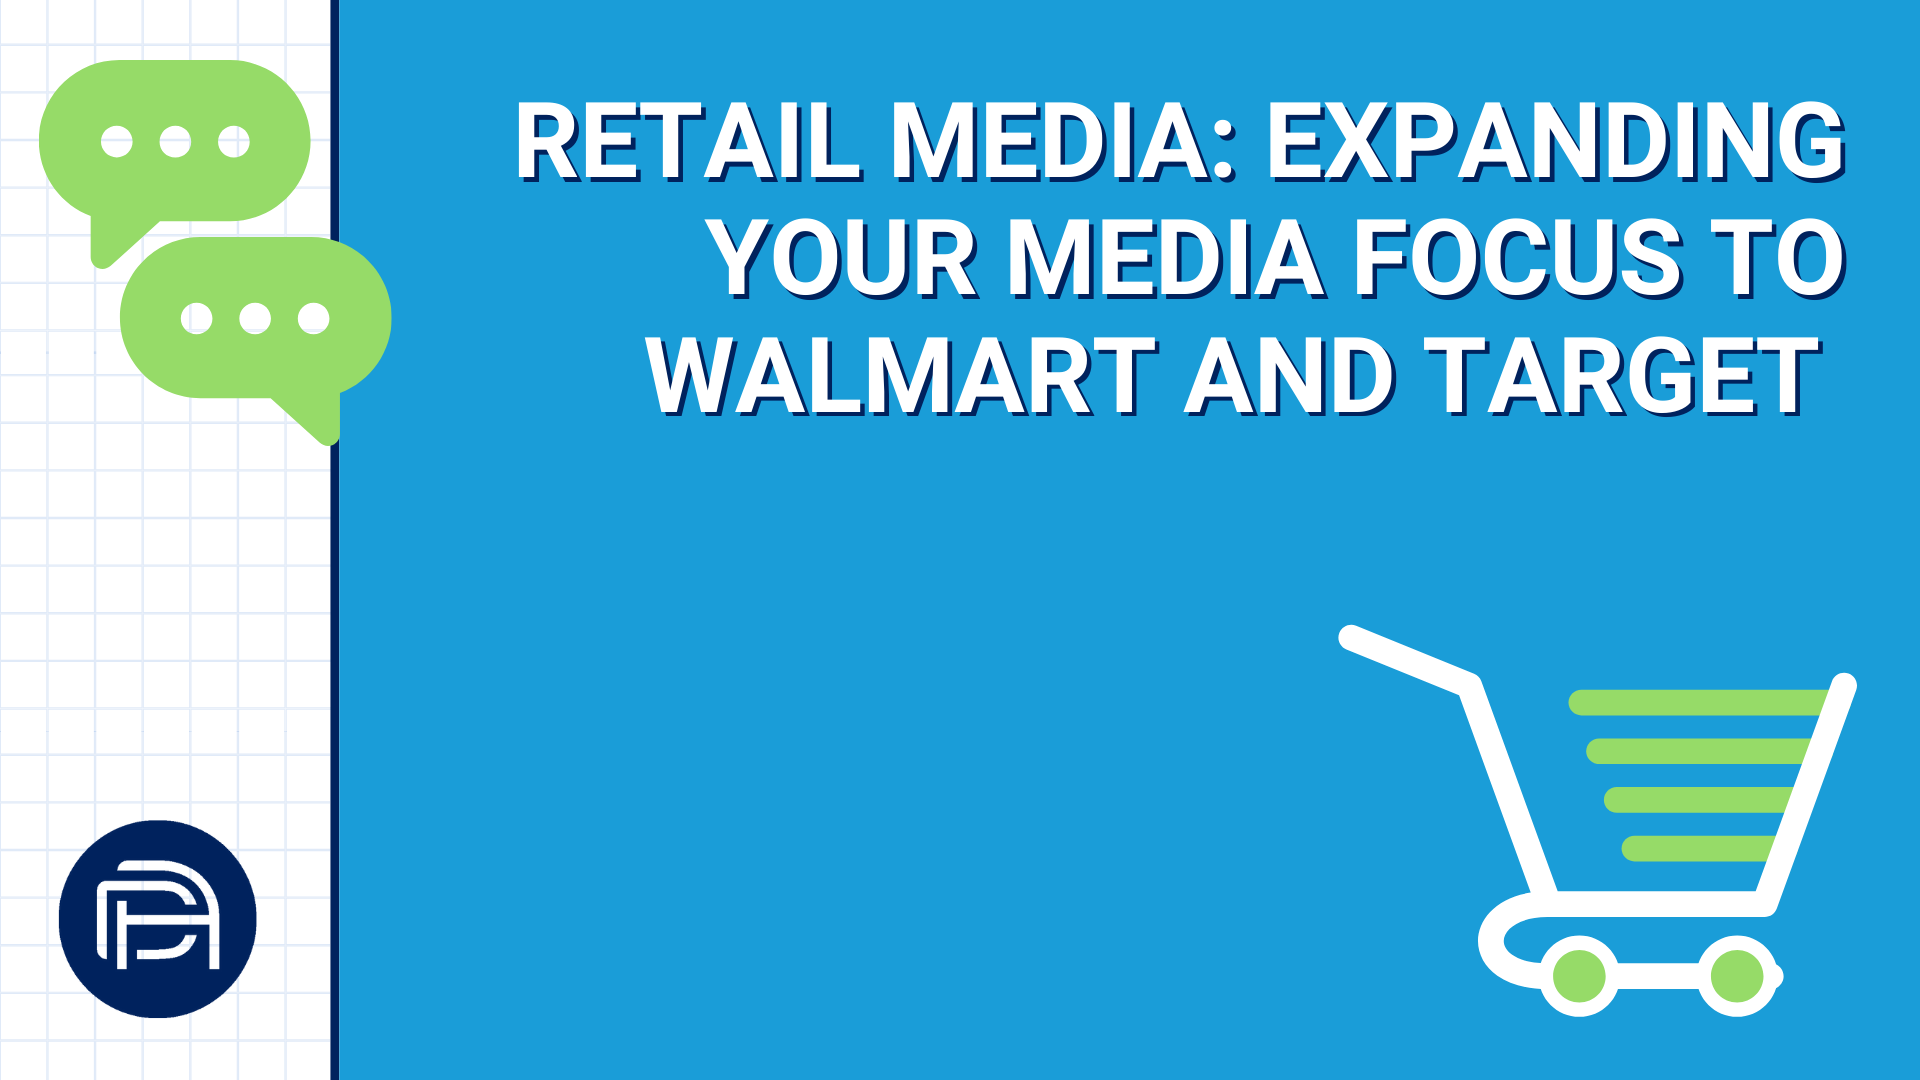 Retail Media: Expanding Your Media Focus To Walmart and Target 